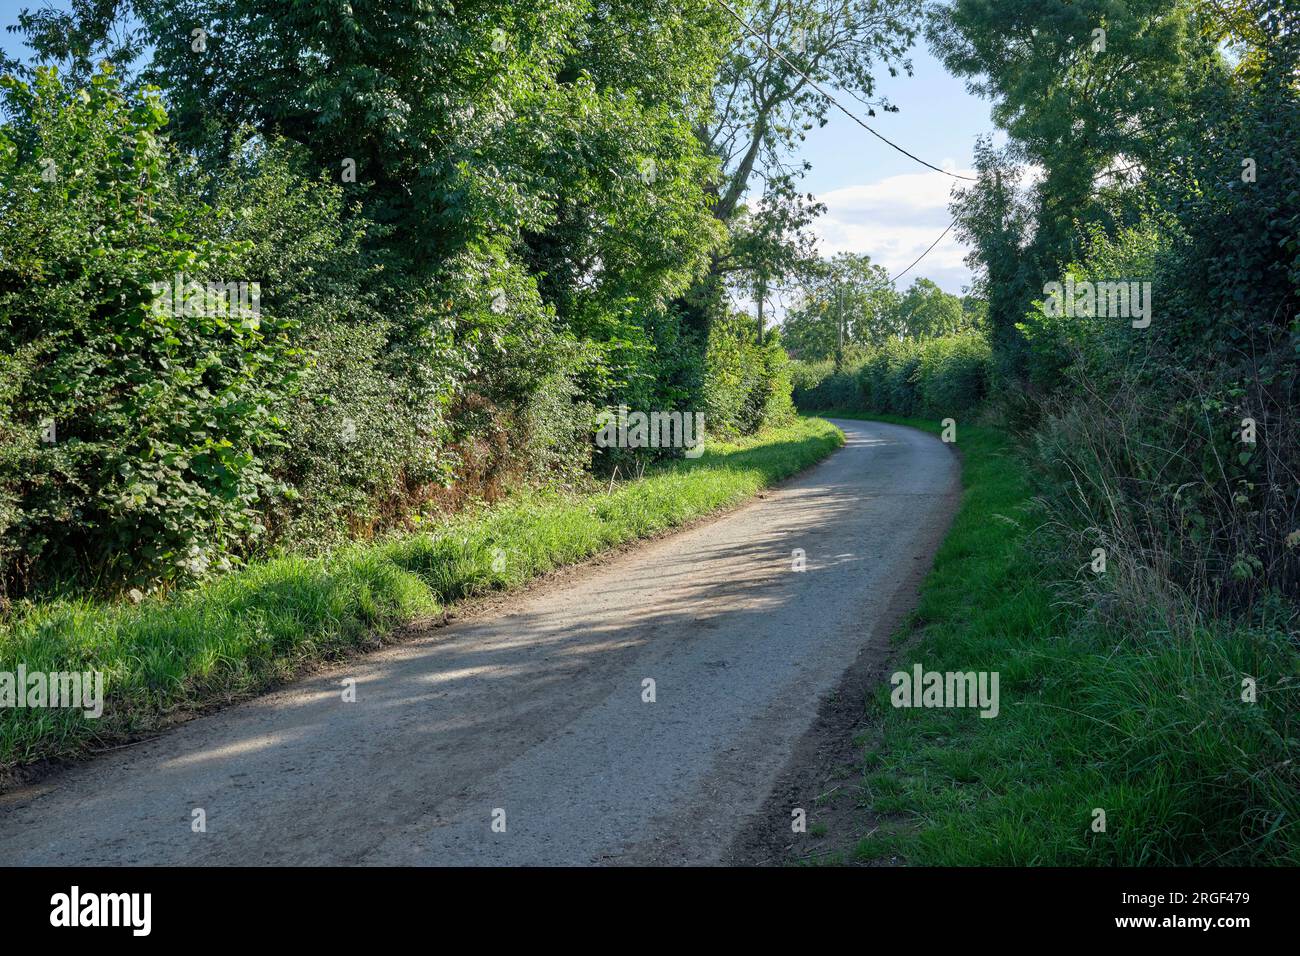 An empty single track country lane, Rural community of Womersley, North Yorkshire, northern England, UK Stock Photo